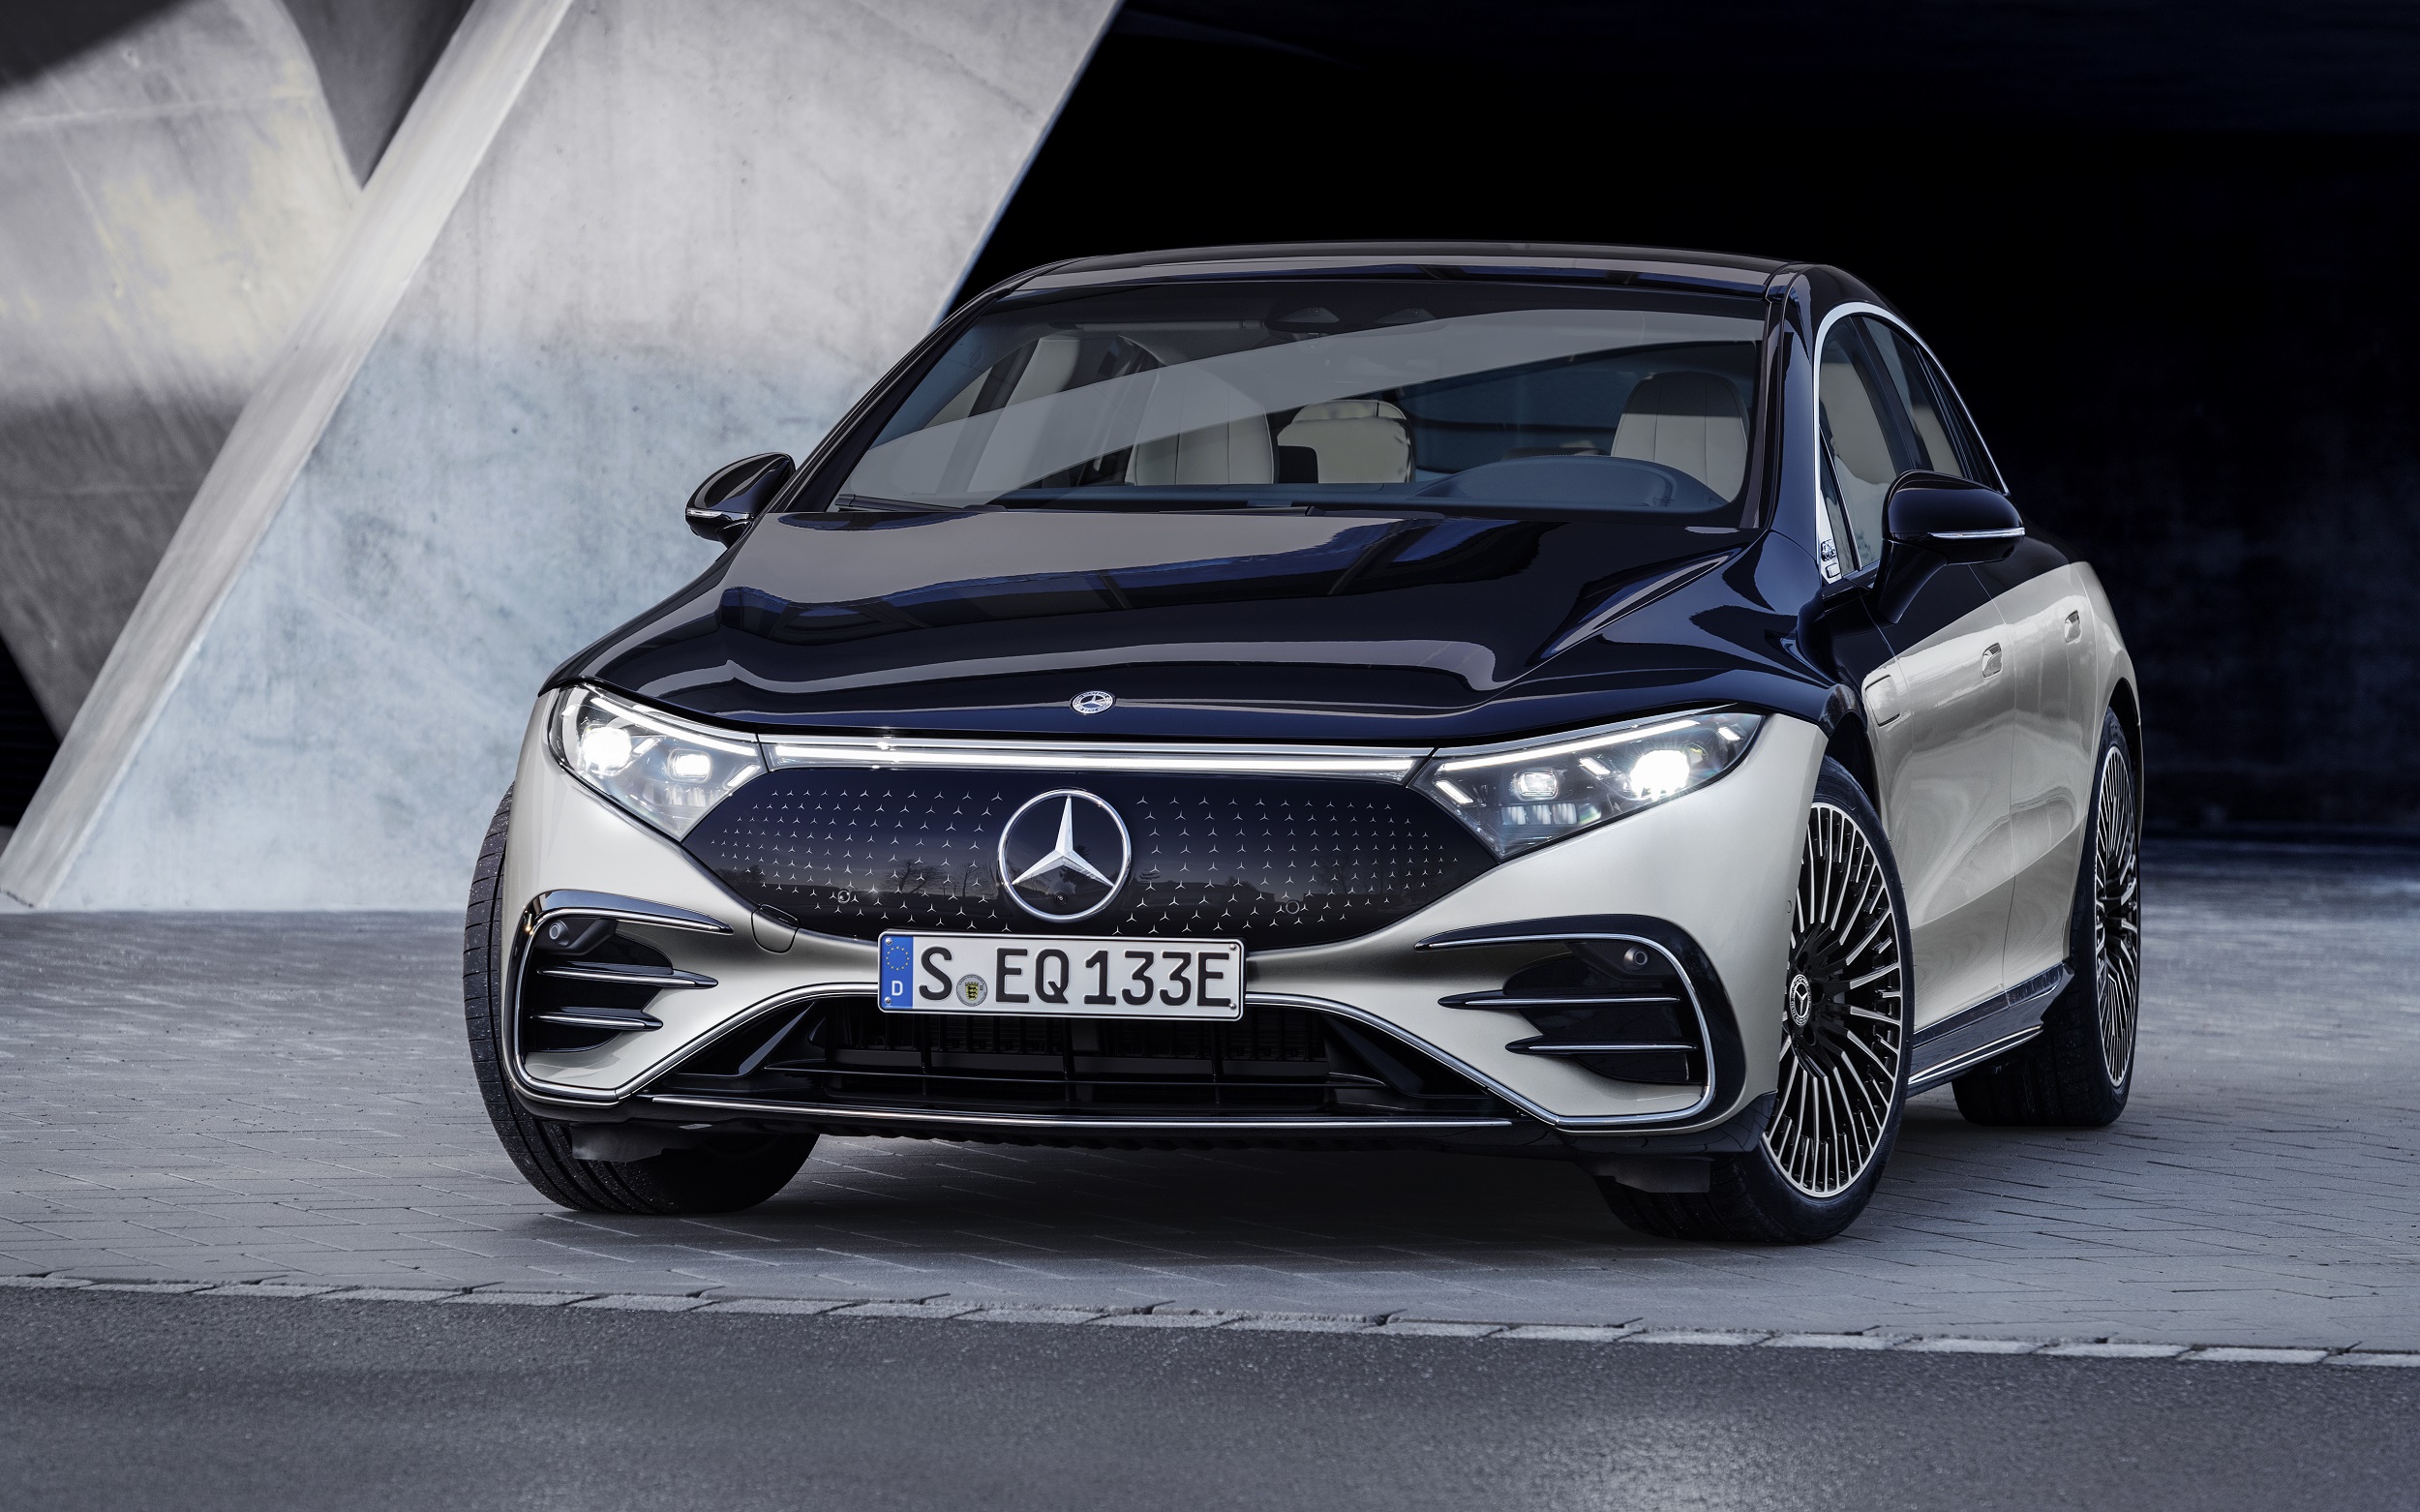 Mercedes-EQ, EQS 580 4MATIC, Exterieur, Farbe: hightechsilber/obsidianschwarz, AMG-Line, Edition 1;( Stromverbrauch kombiniert: 20,0-16,9 kWh/100 km; CO2-Emissionen kombiniert: 0 g/km);Stromverbrauch kombiniert: 20,0-16,9 kWh/100 km; CO2-Emissionen kombiniert: 0 g/km* Mercedes-EQ, EQS 580 4MATIC, Exterior, colour: high-tech silver/obsidian black, AMG-Line, Edition 1; (combined electrical consumption: 20.0-16.9 kWh/100 km; combined CO2 emissions: 0 g/km);Combined electrical consumption: 20.0-16.9 kWh/100 km; combined CO2 emissions: 0 g/km